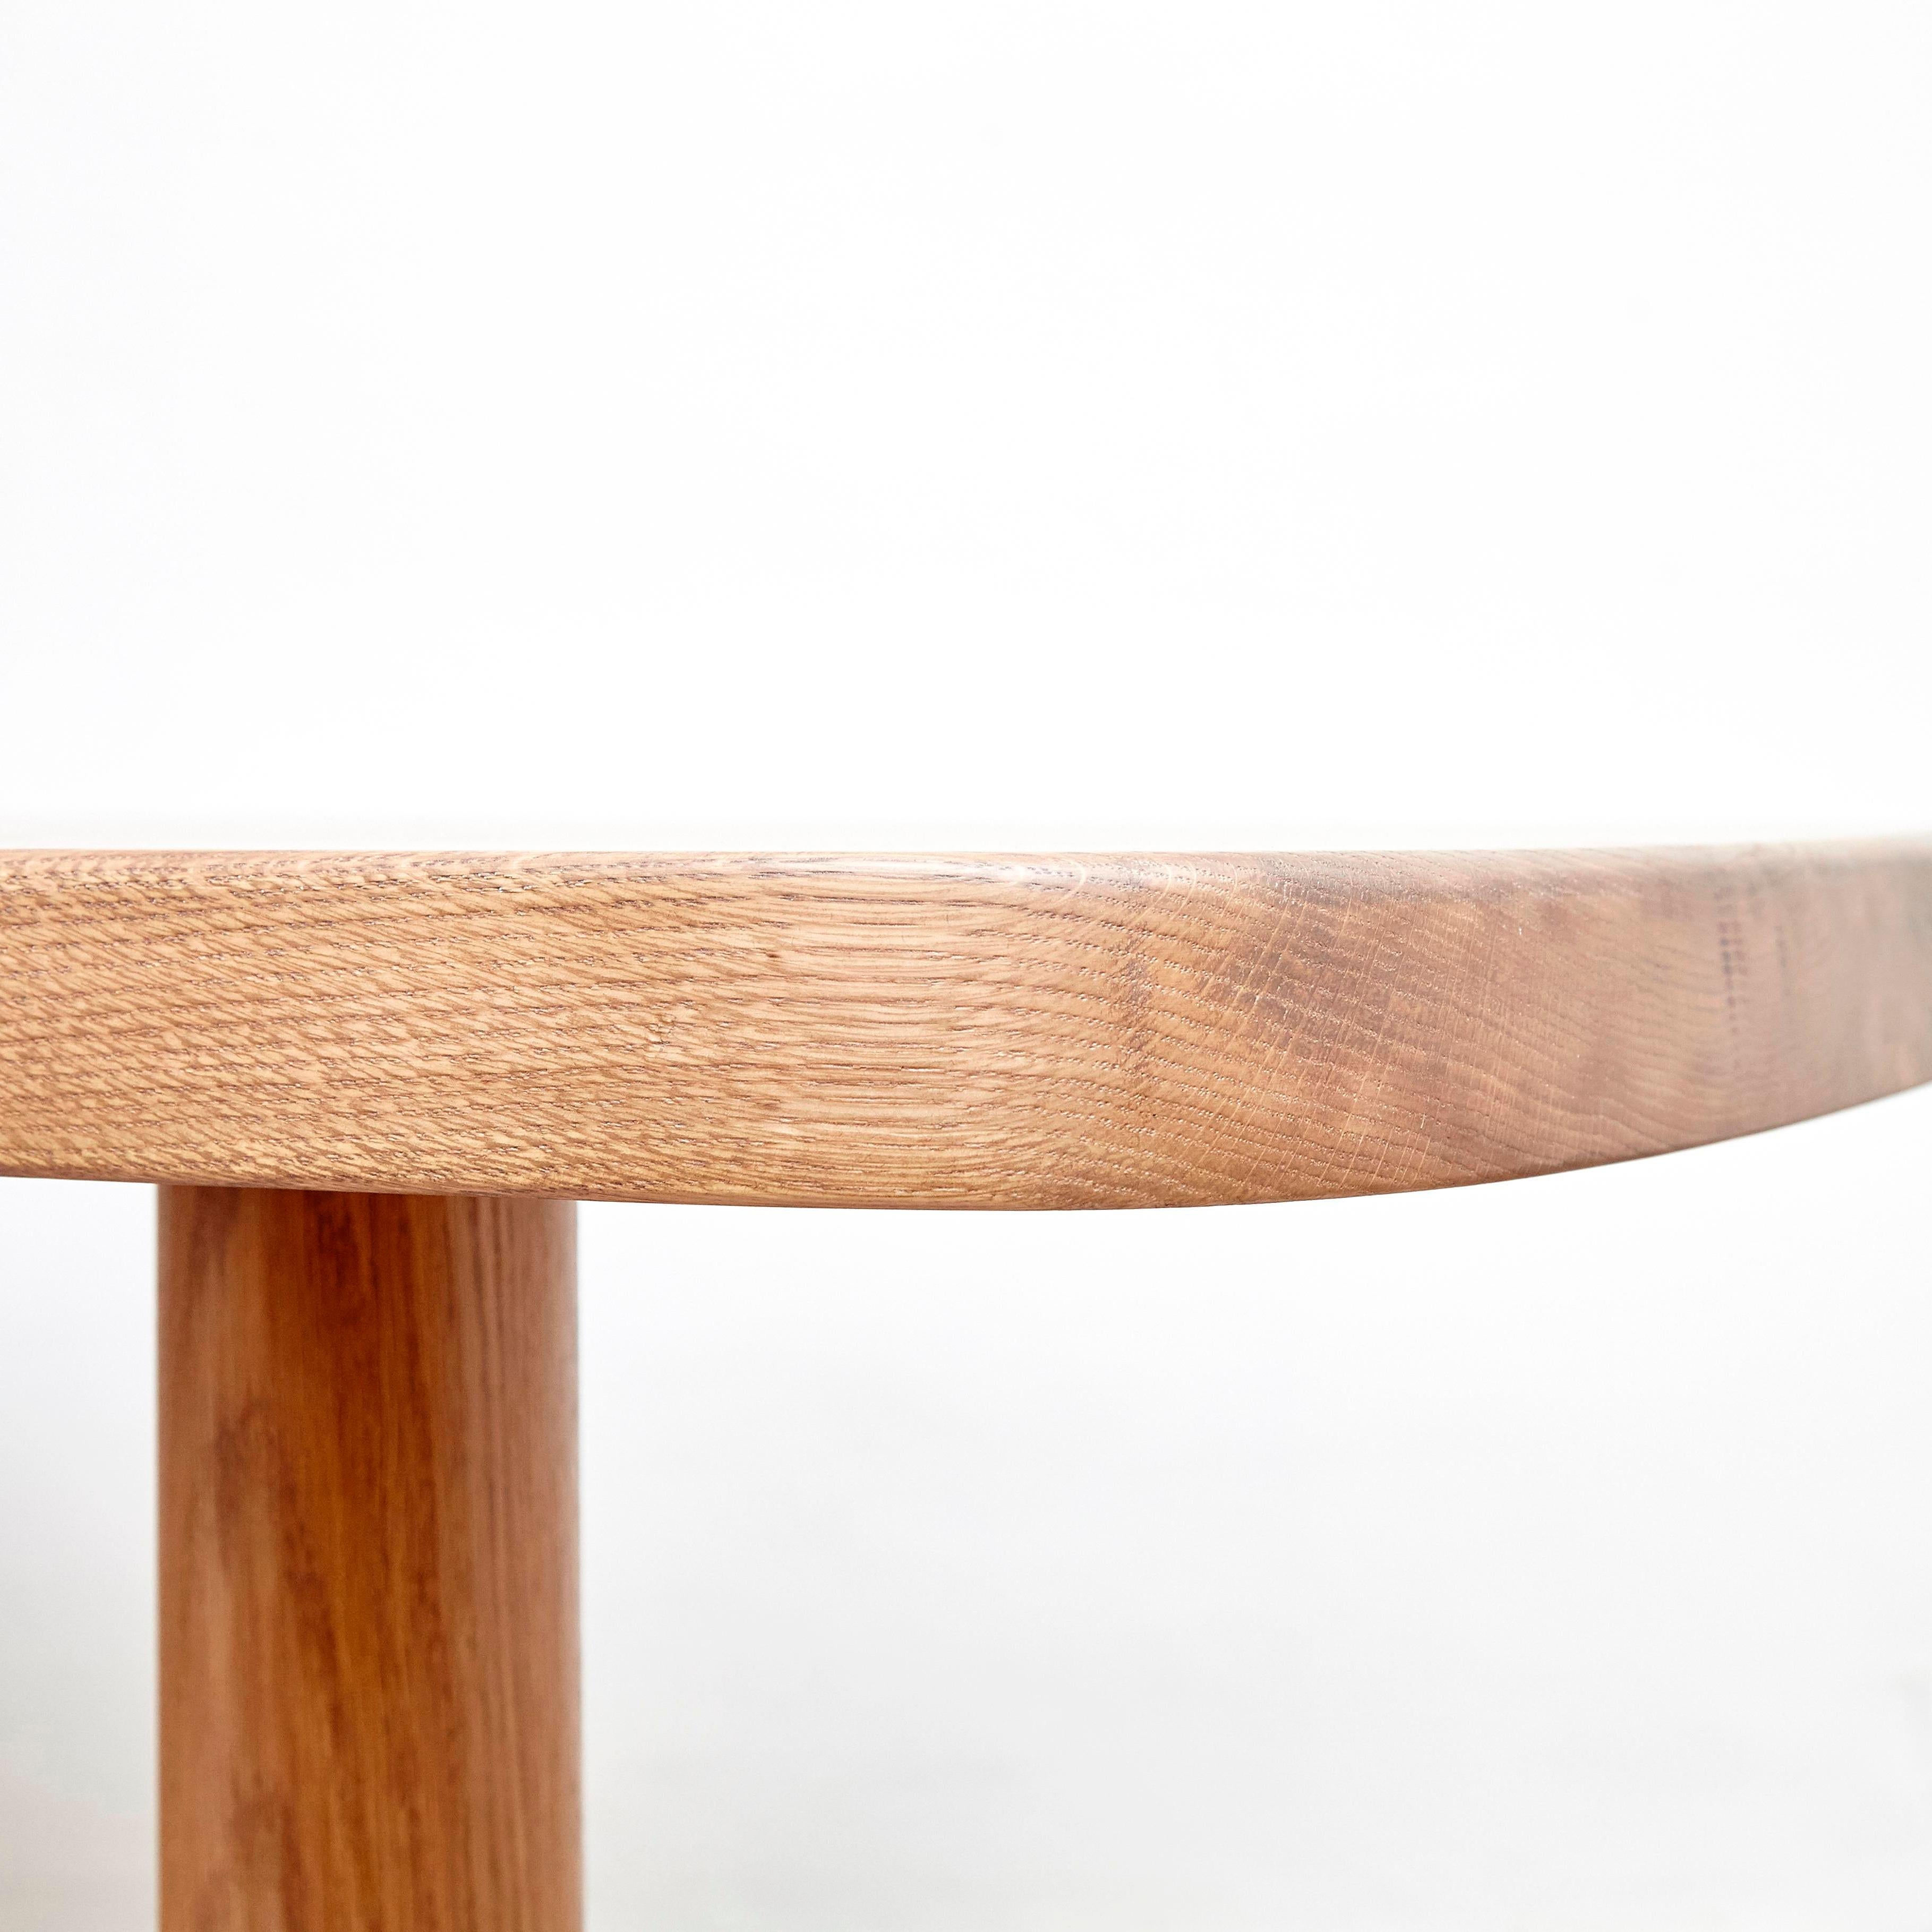 Dada Est. Contemporary, Oak Free-Form Dining Large Table 1